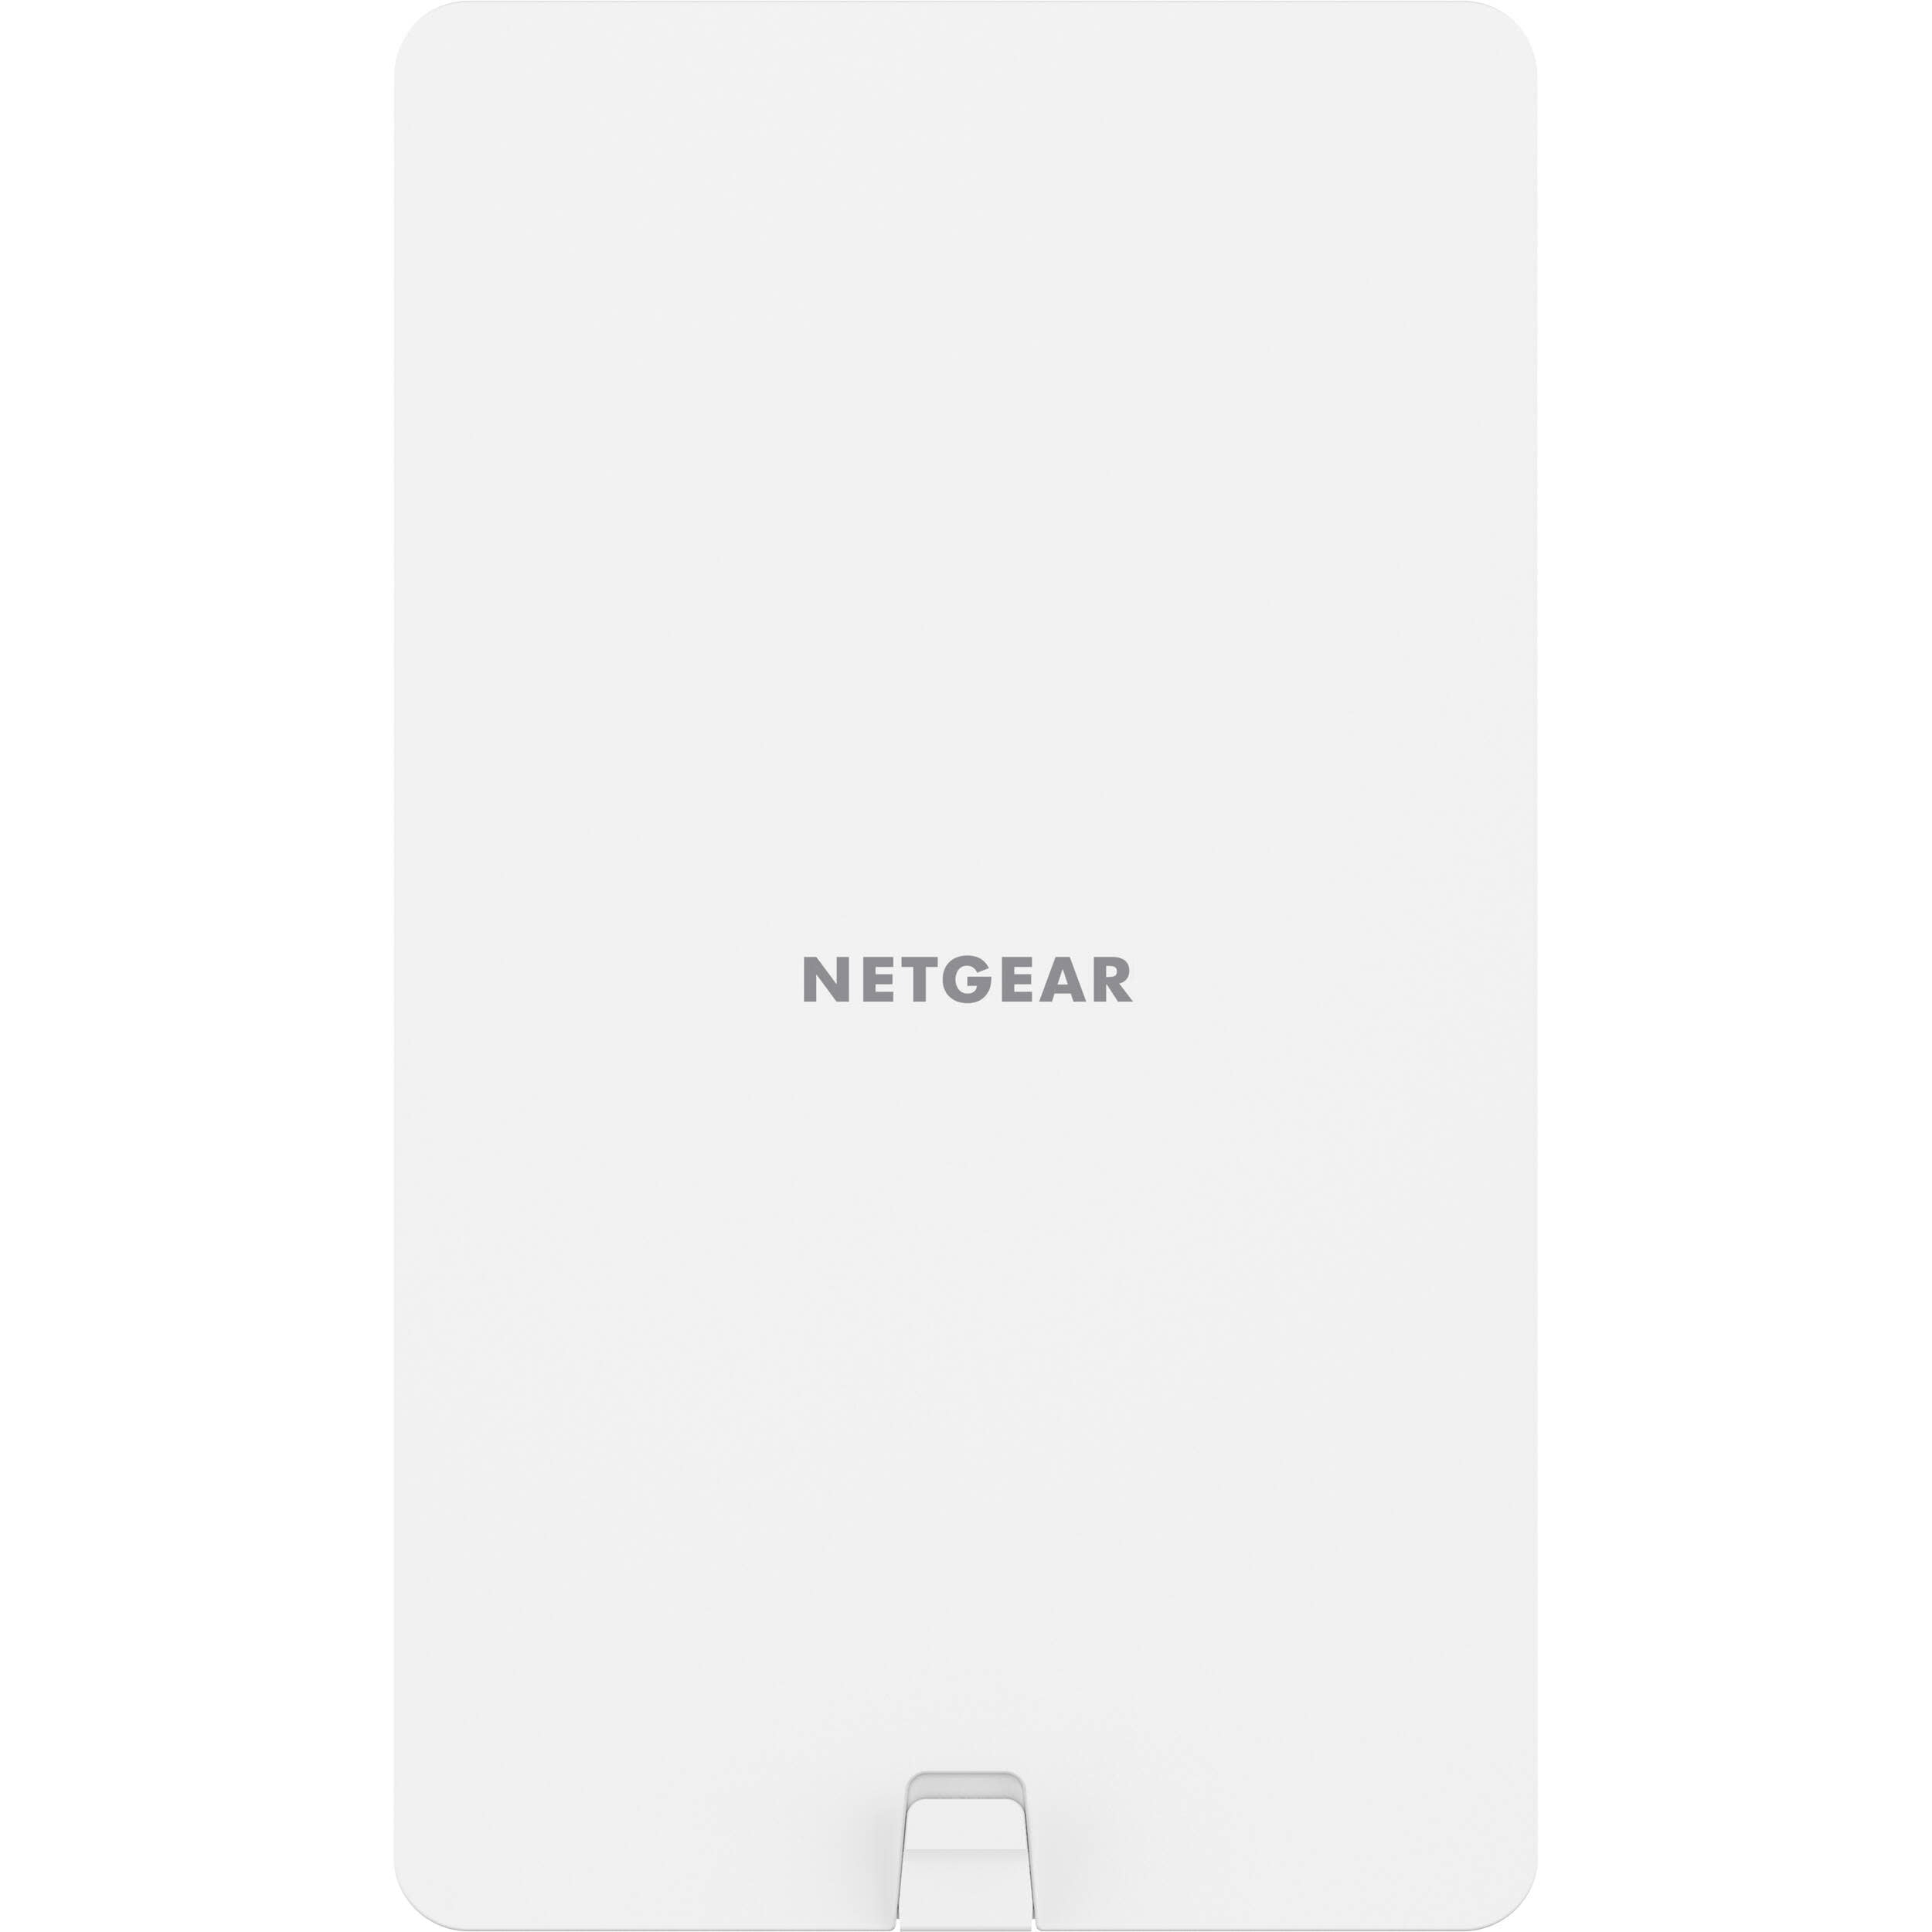 NETGEAR AX1800 Dual Outdoor PoE Insight WiFi Managed Band 6 Point, White Multi-Gig Access